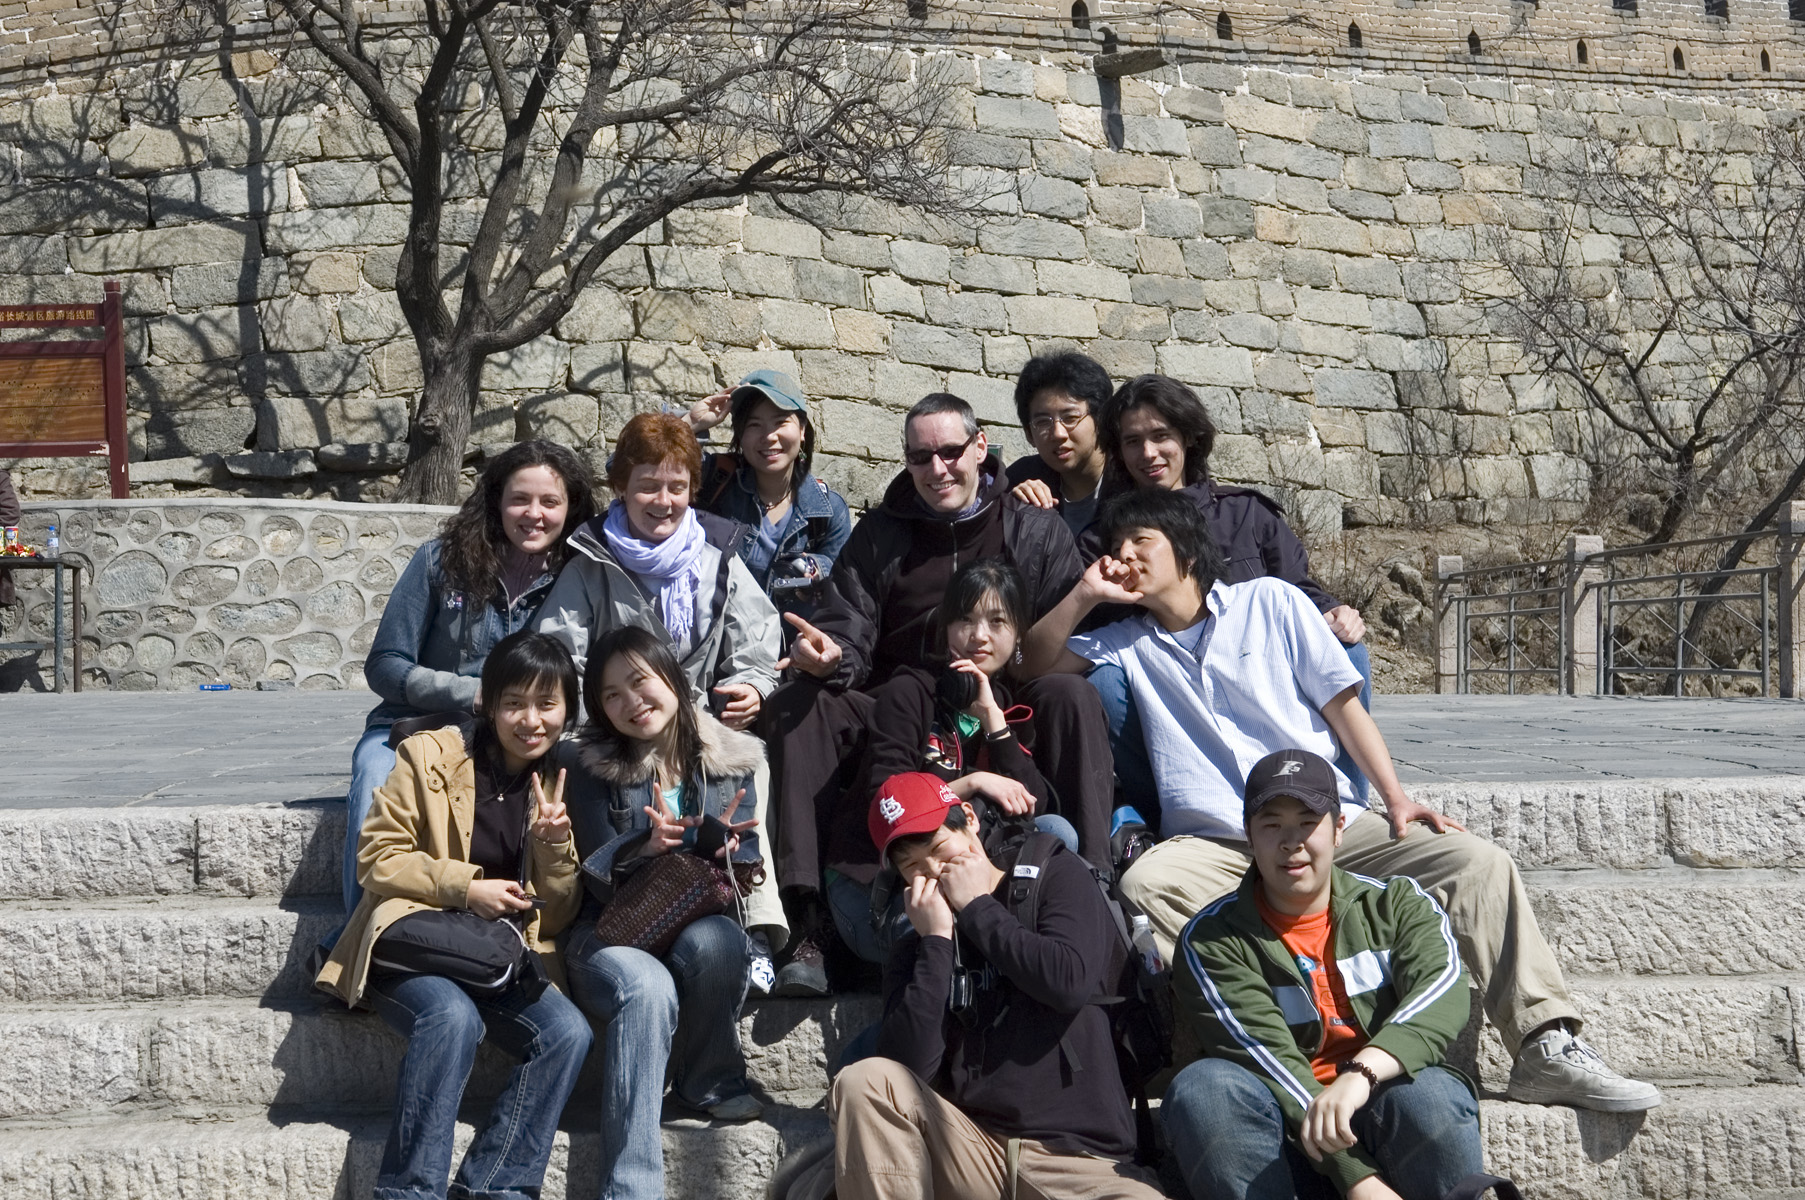 a group of people posing for a picture on a stone steps